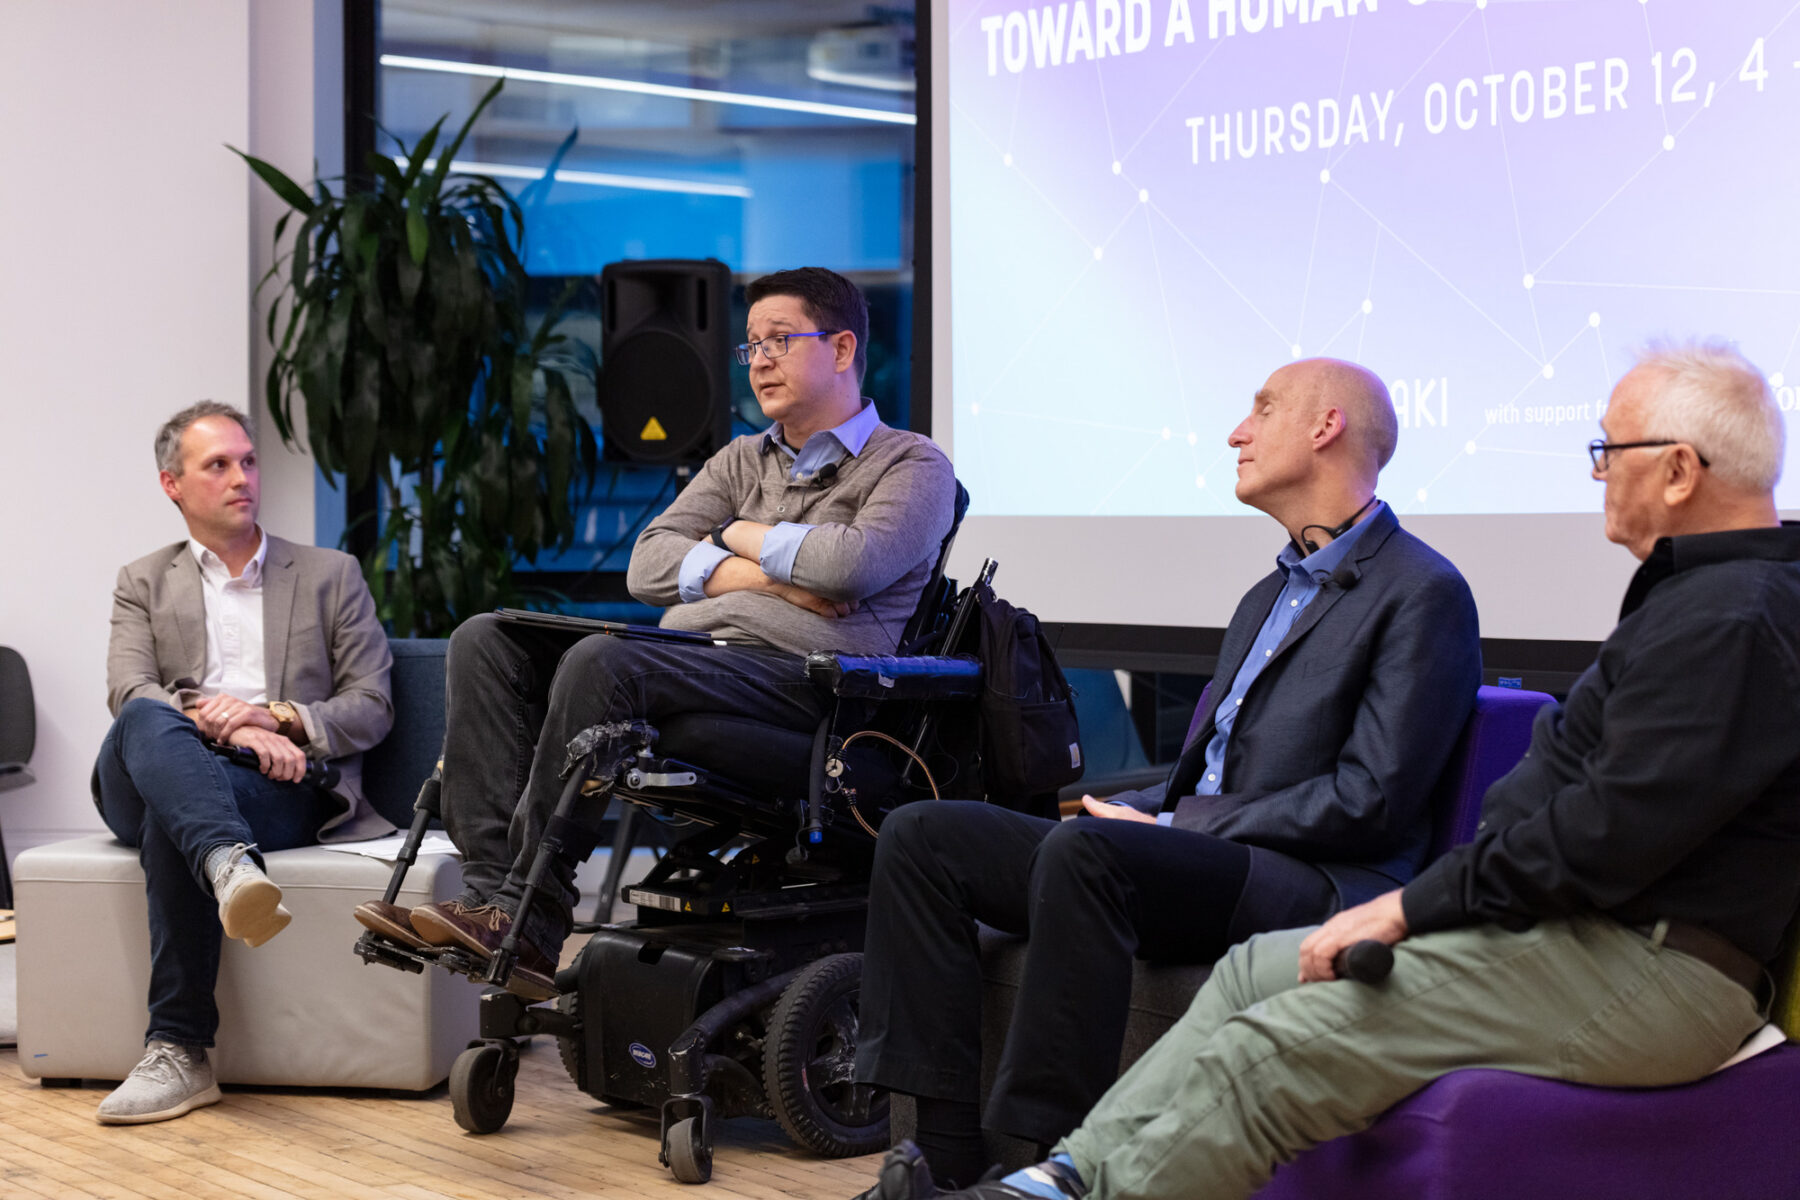 four men sit in front of a projector screen. the three men are looking at the one man speaking, who uses a motorized wheelchair